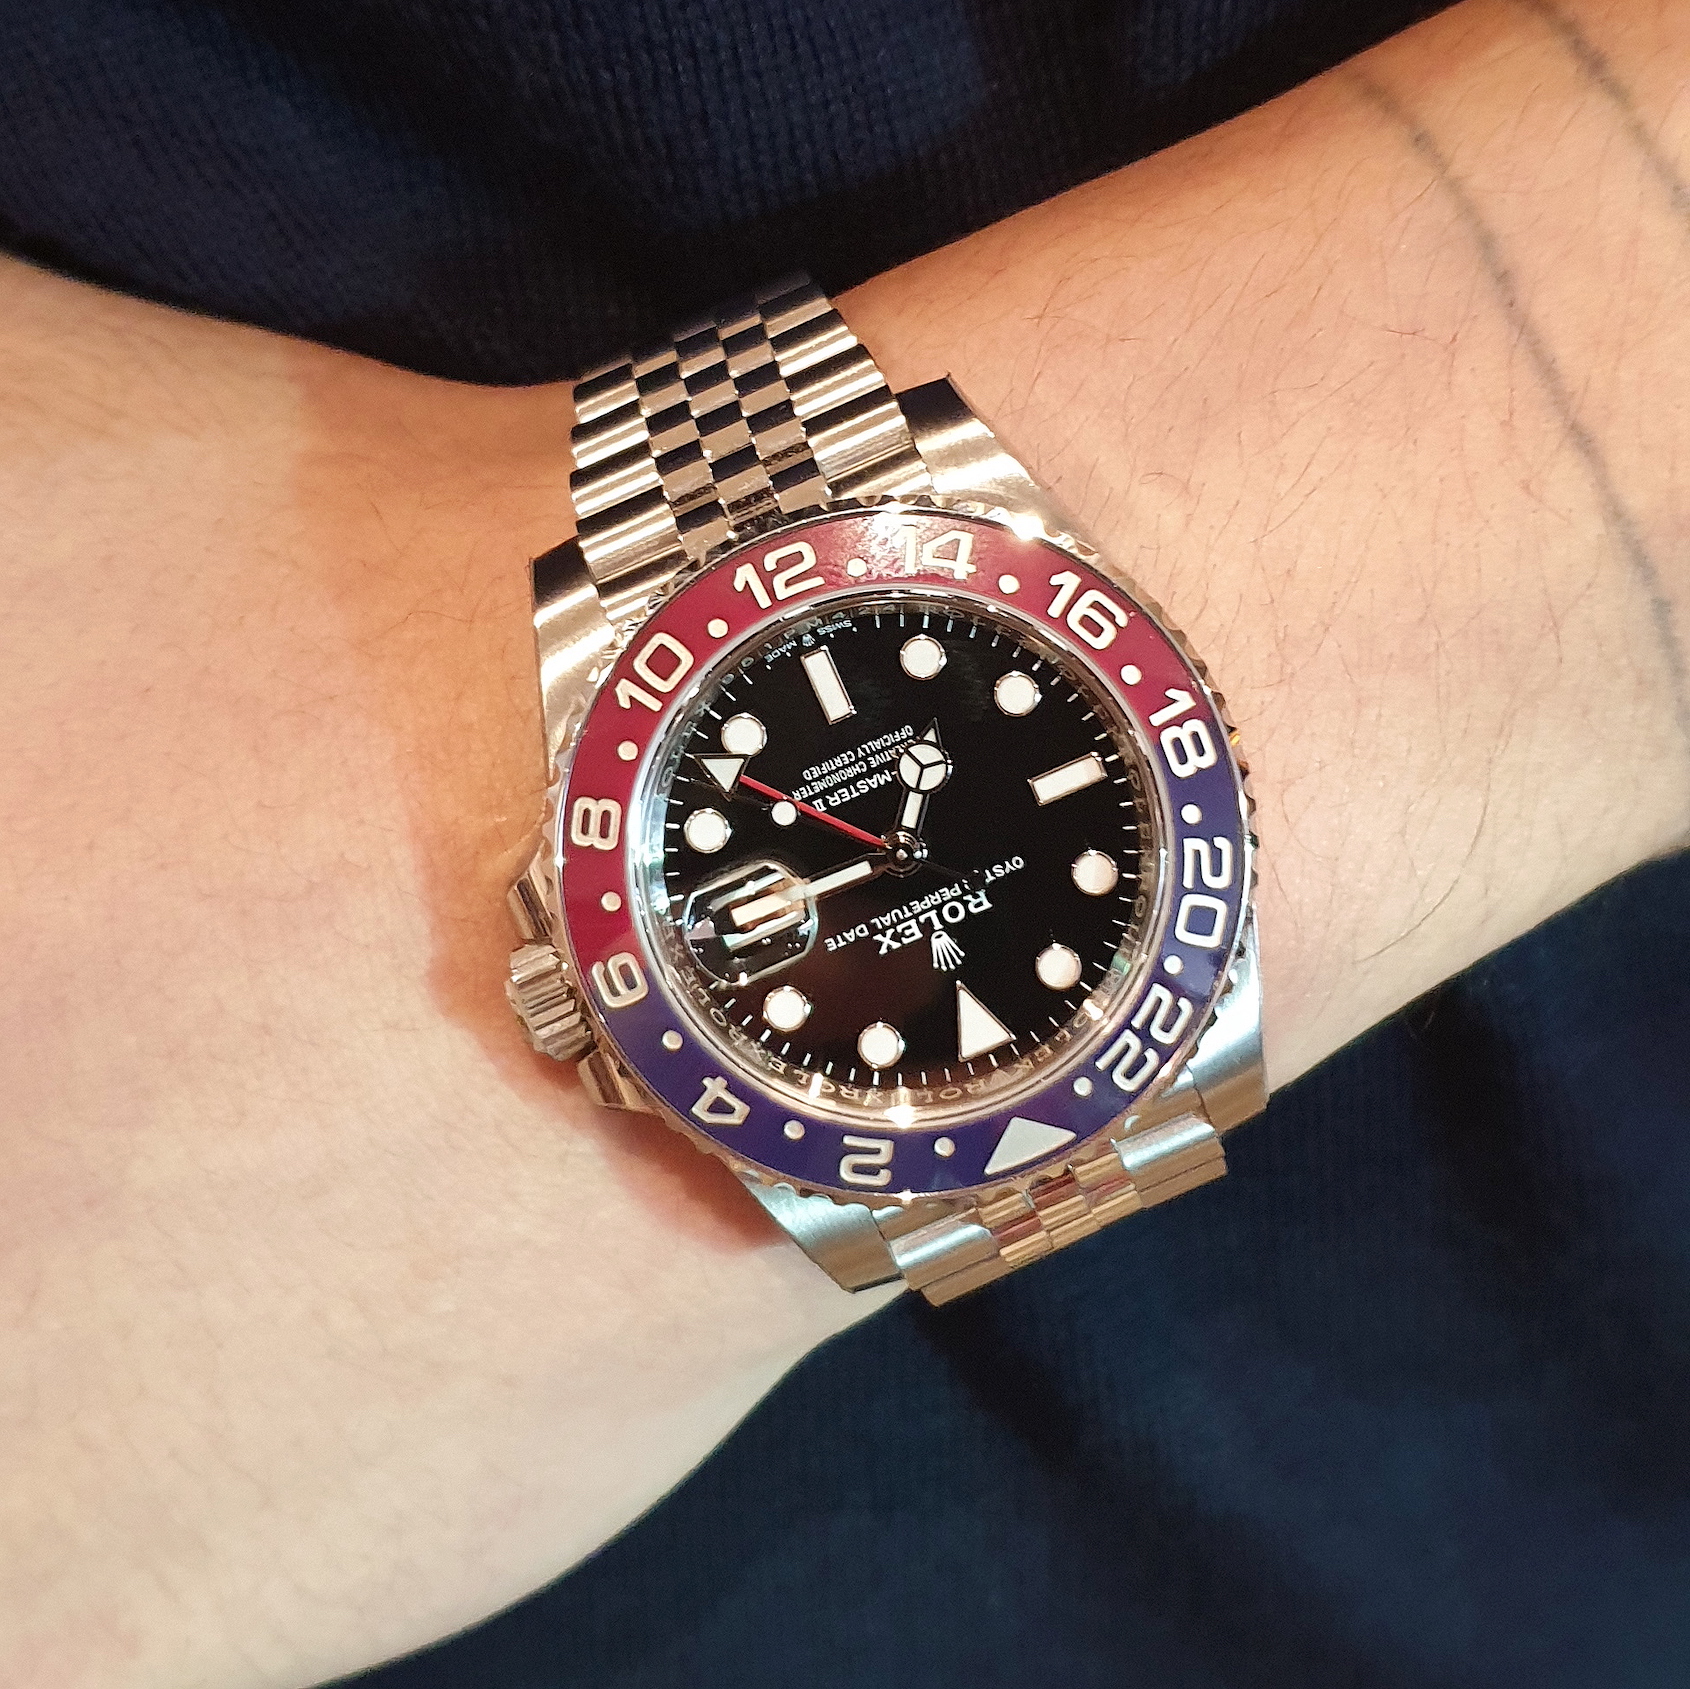 Weekend Watch Spotting – Very rare Rolex spotted in the HSNY Edition